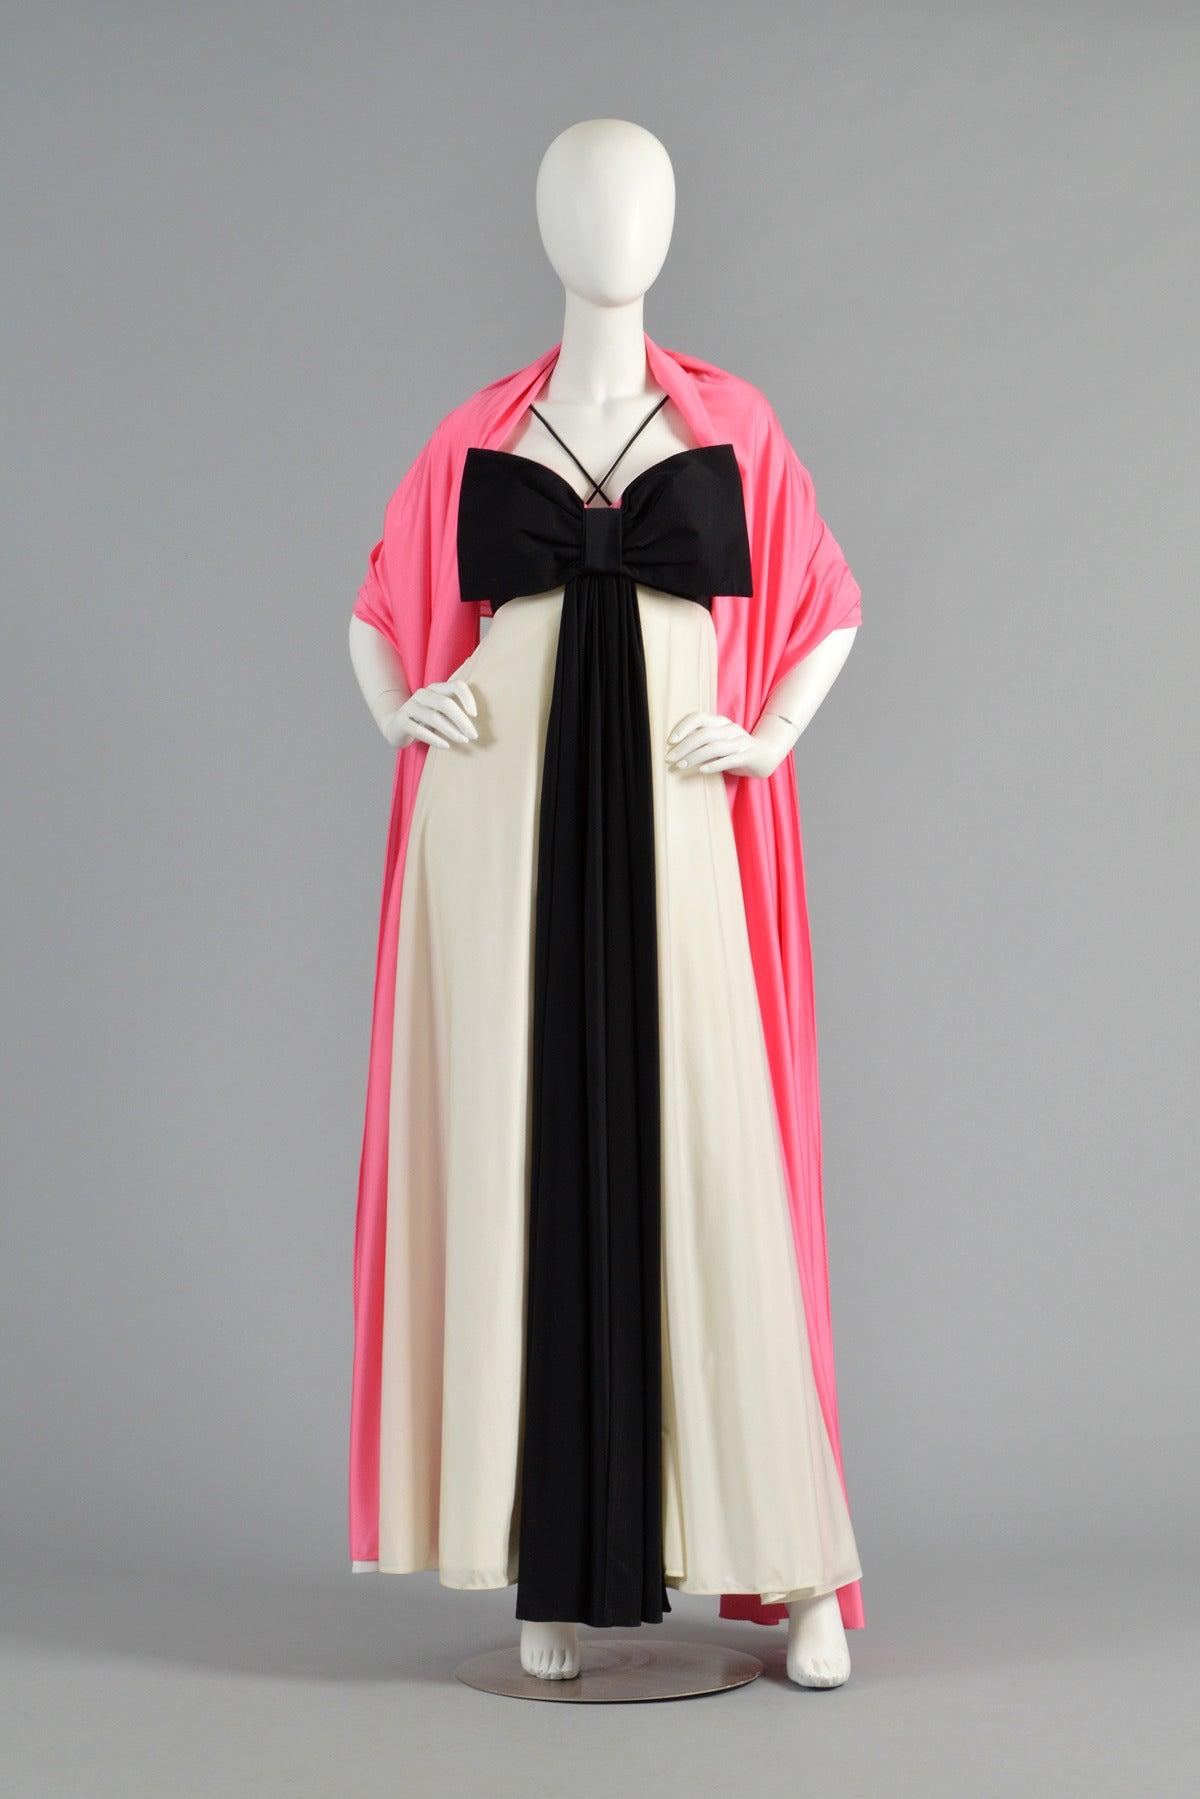 Les Wilk 1970's Colorblock Evening Gown with Massive Bow In Excellent Condition For Sale In Yucca Valley, CA